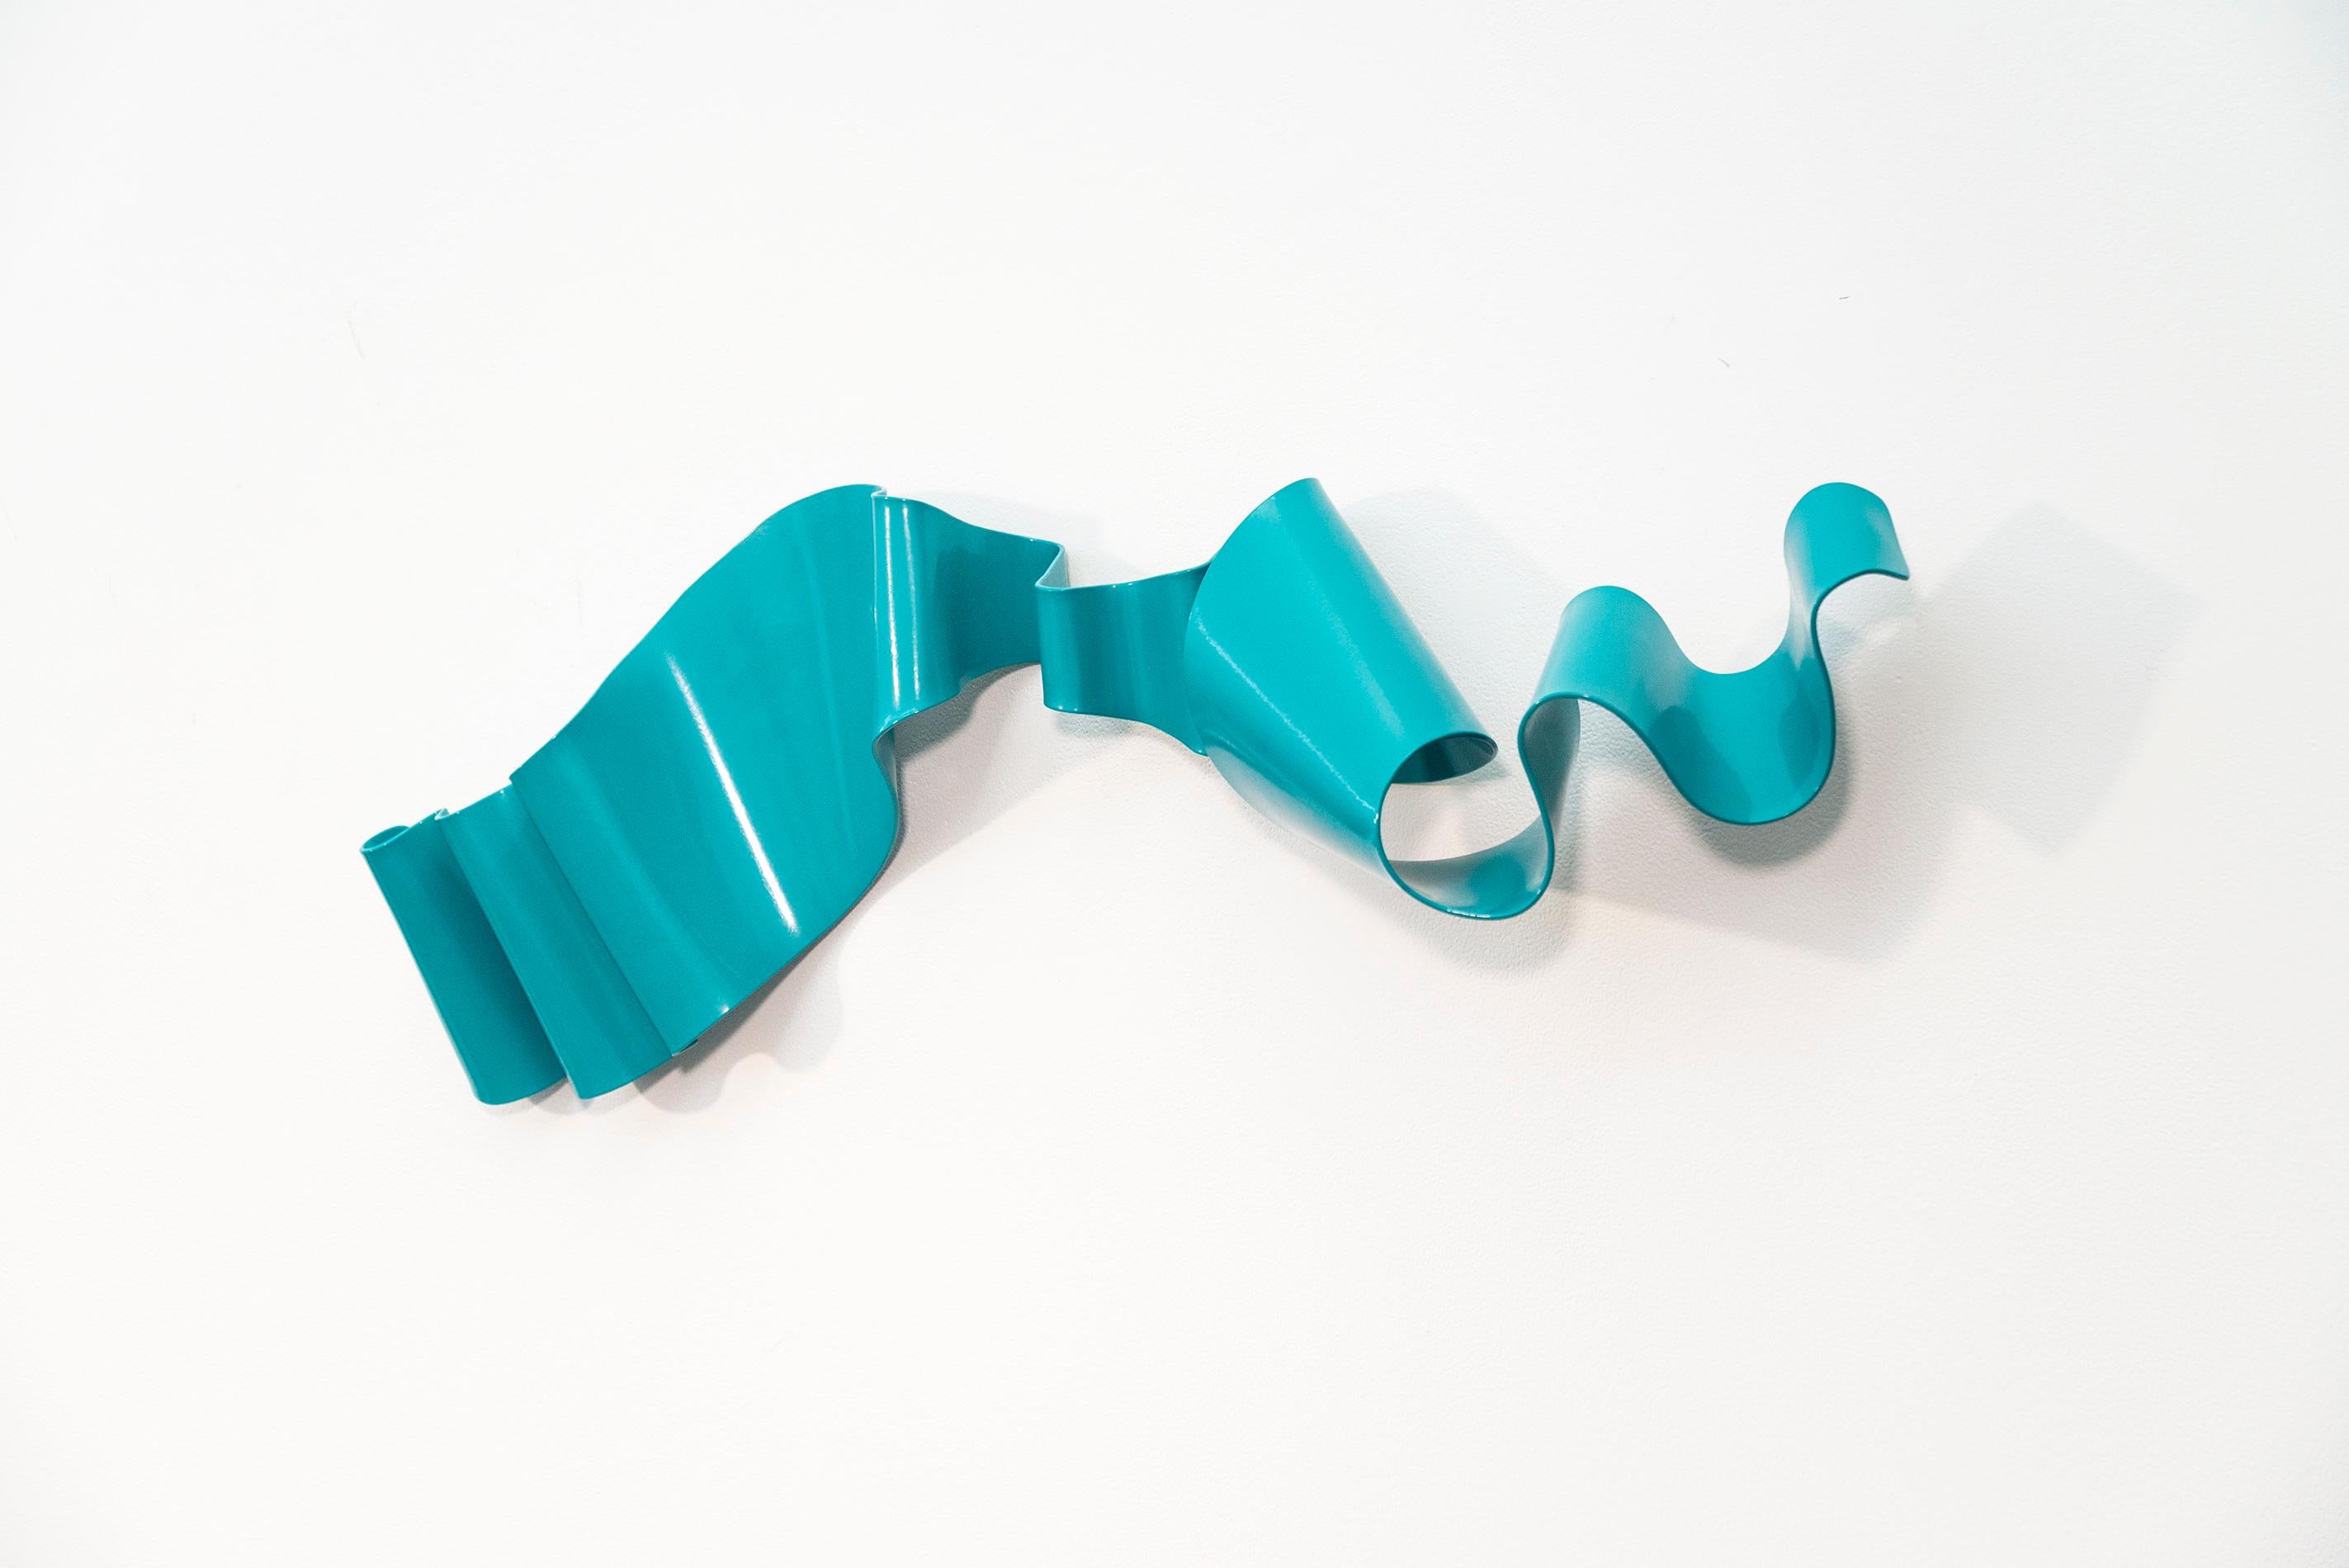 Soul Gate 46 - glossy, contemporary, ribbon, powder coated steel, wall sculpture - Contemporary Sculpture by Stefan Duerst